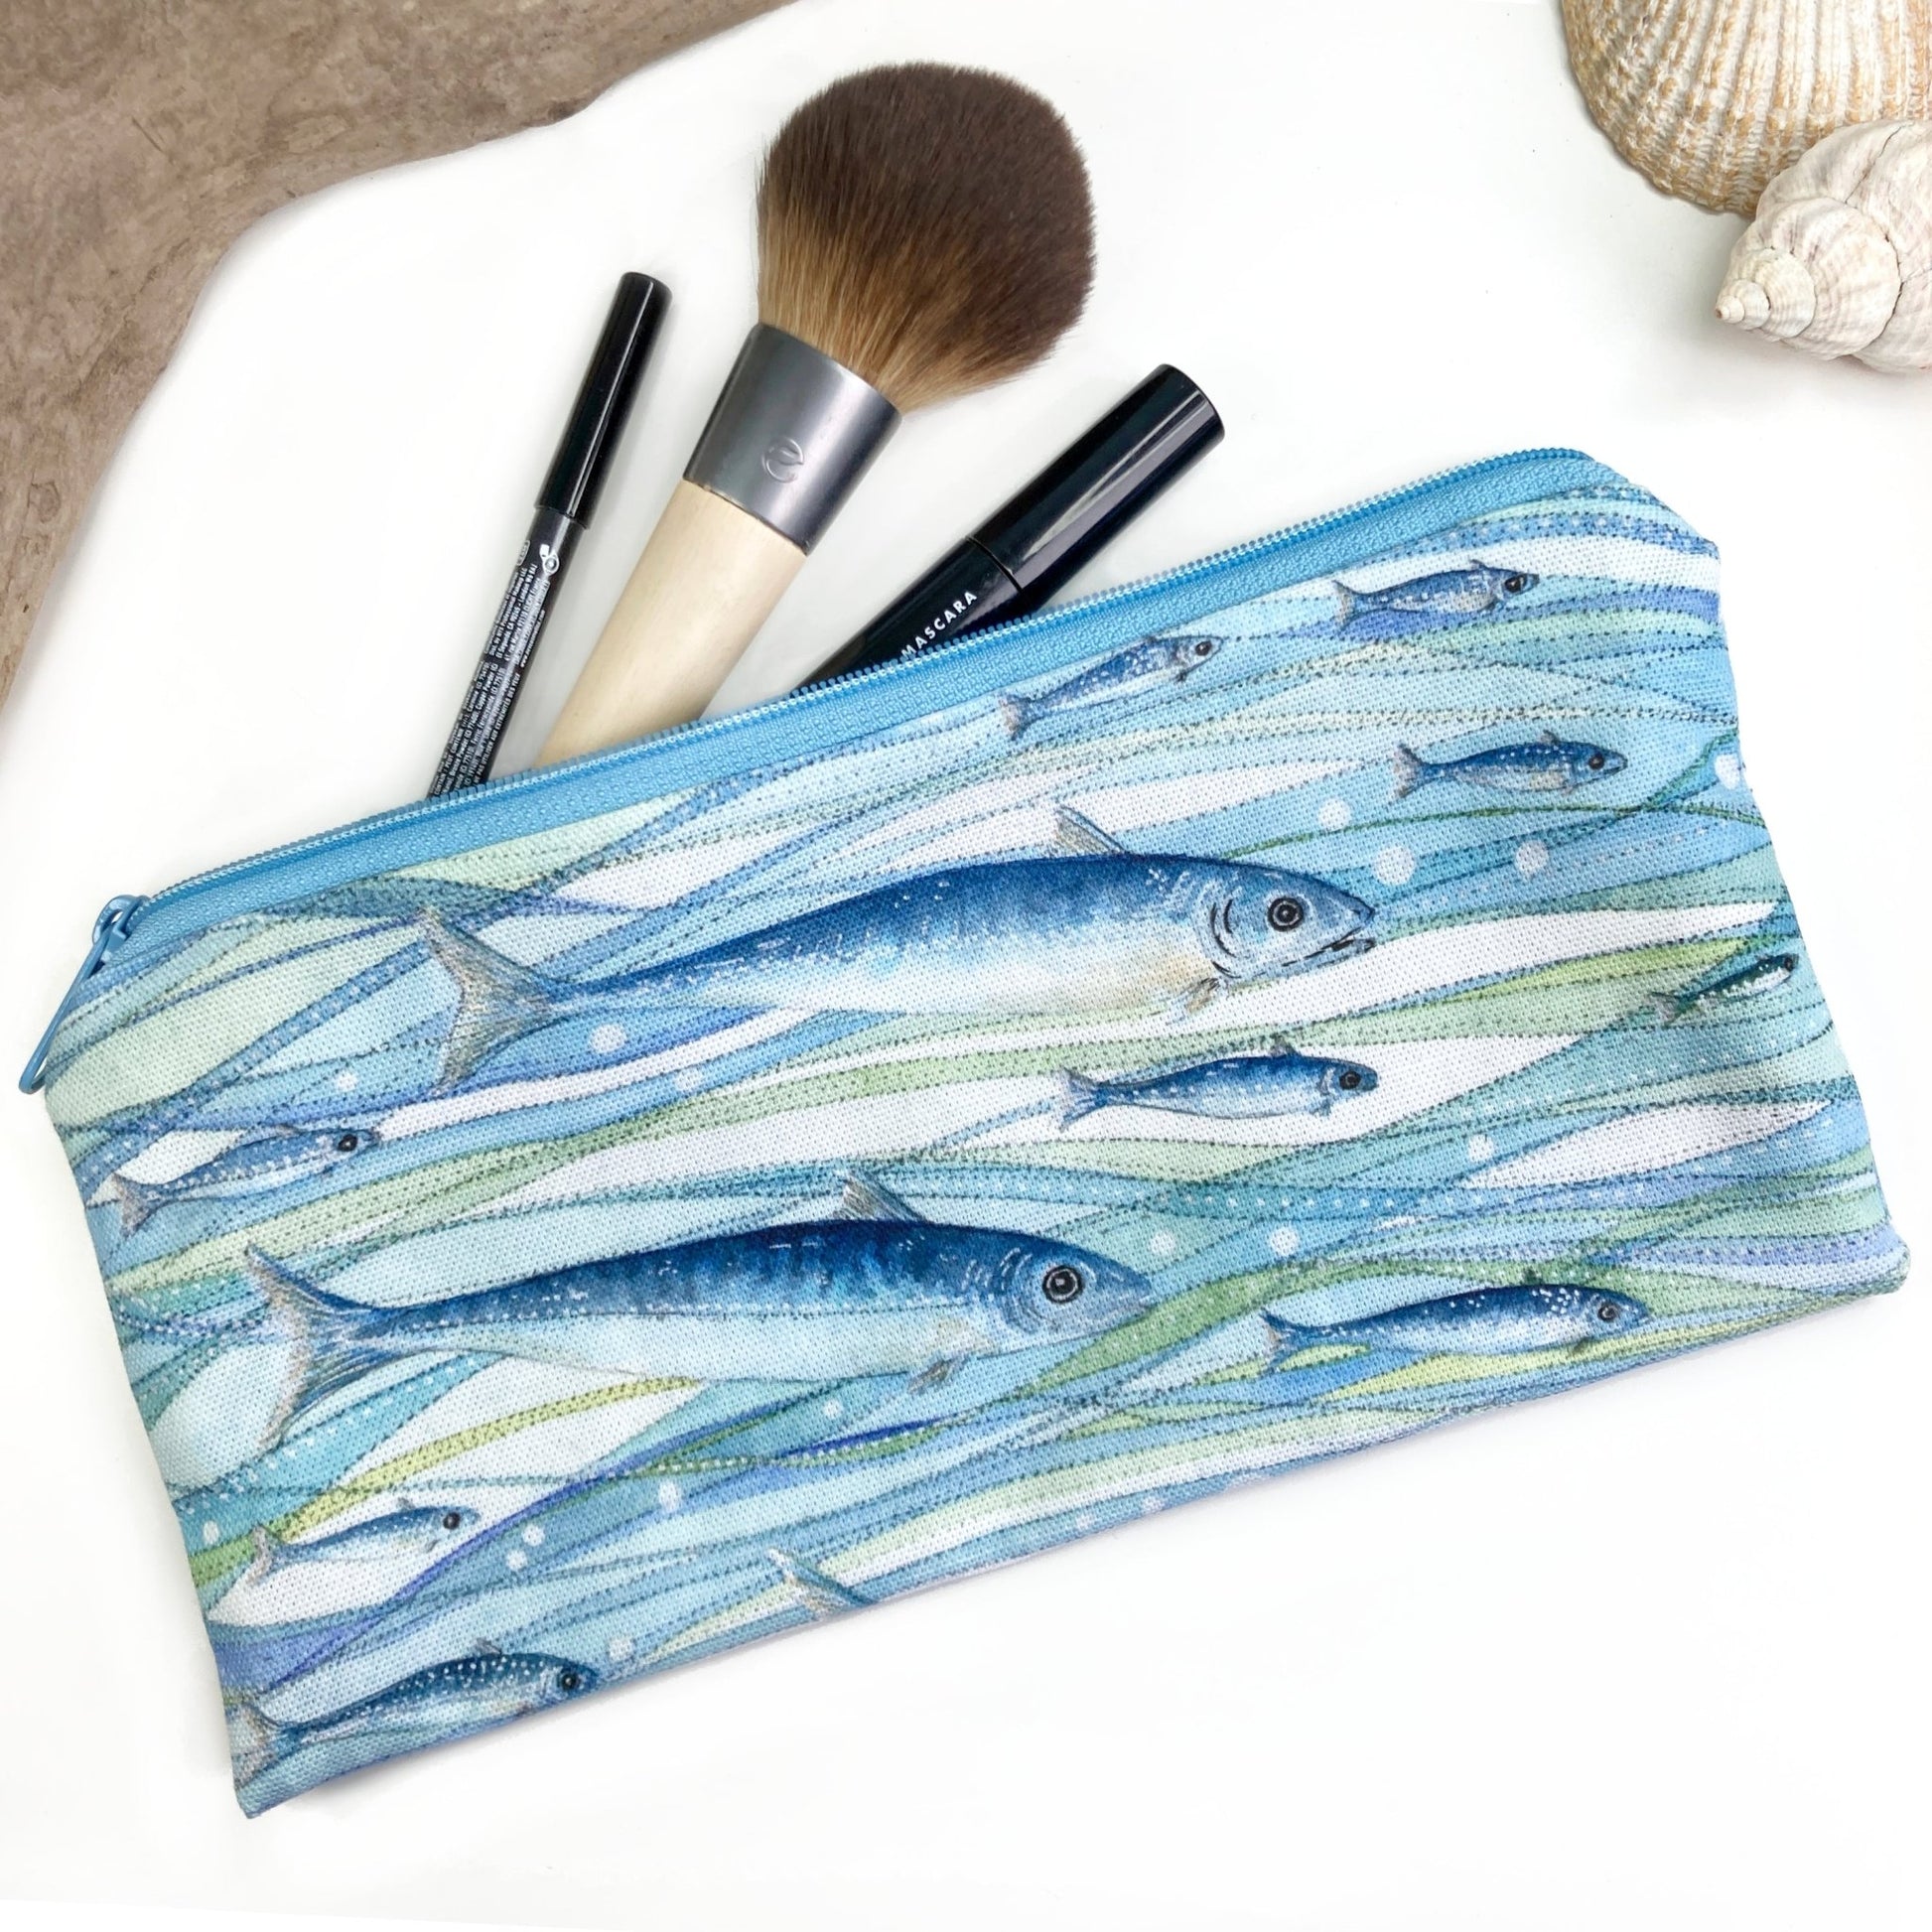 Make Up Bag or Pencil Case - Handmade Nautical Print with Fish - East Neuk Beach Crafts